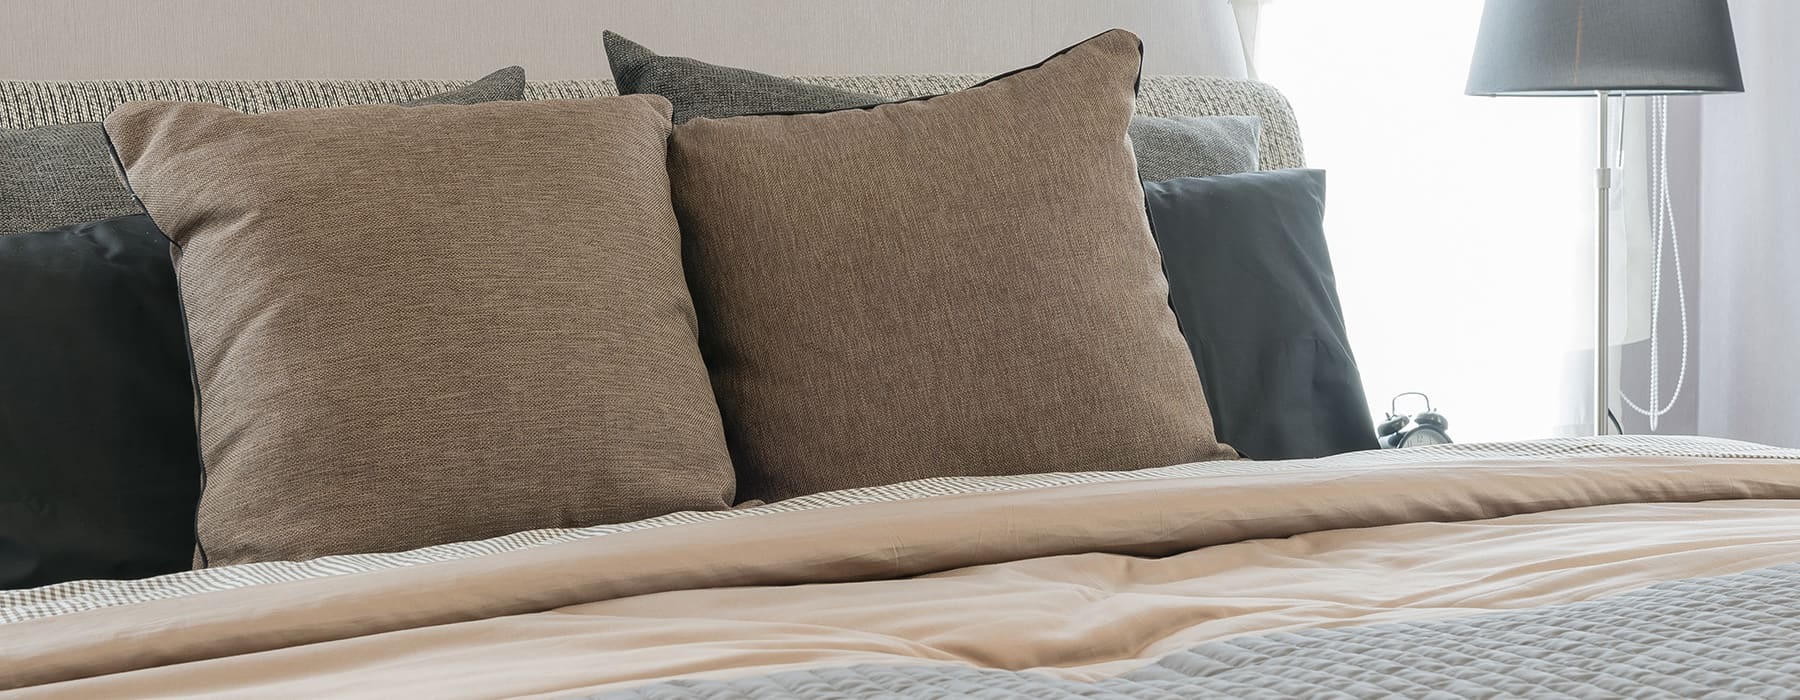 close-up of pillows in a warm toned bedroom